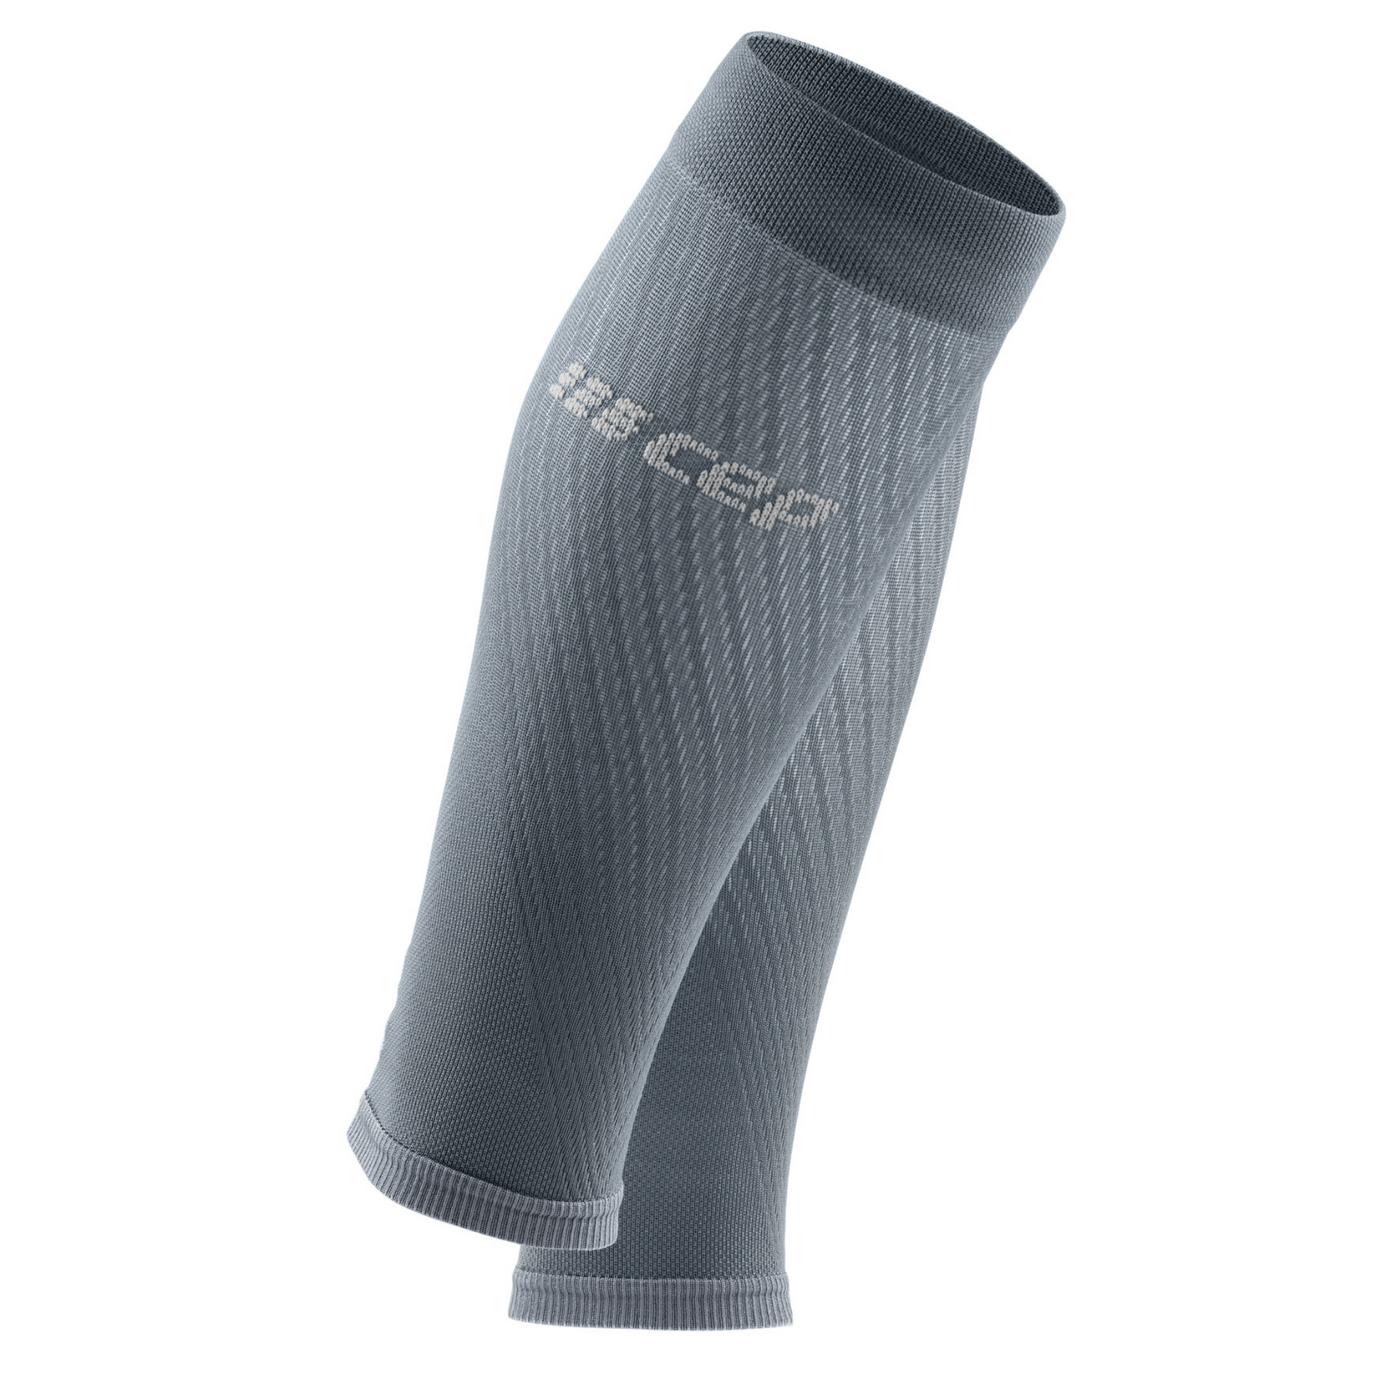 Ultralight Compression Calf Sleeves, Men, Grey/Light Grey, Front View